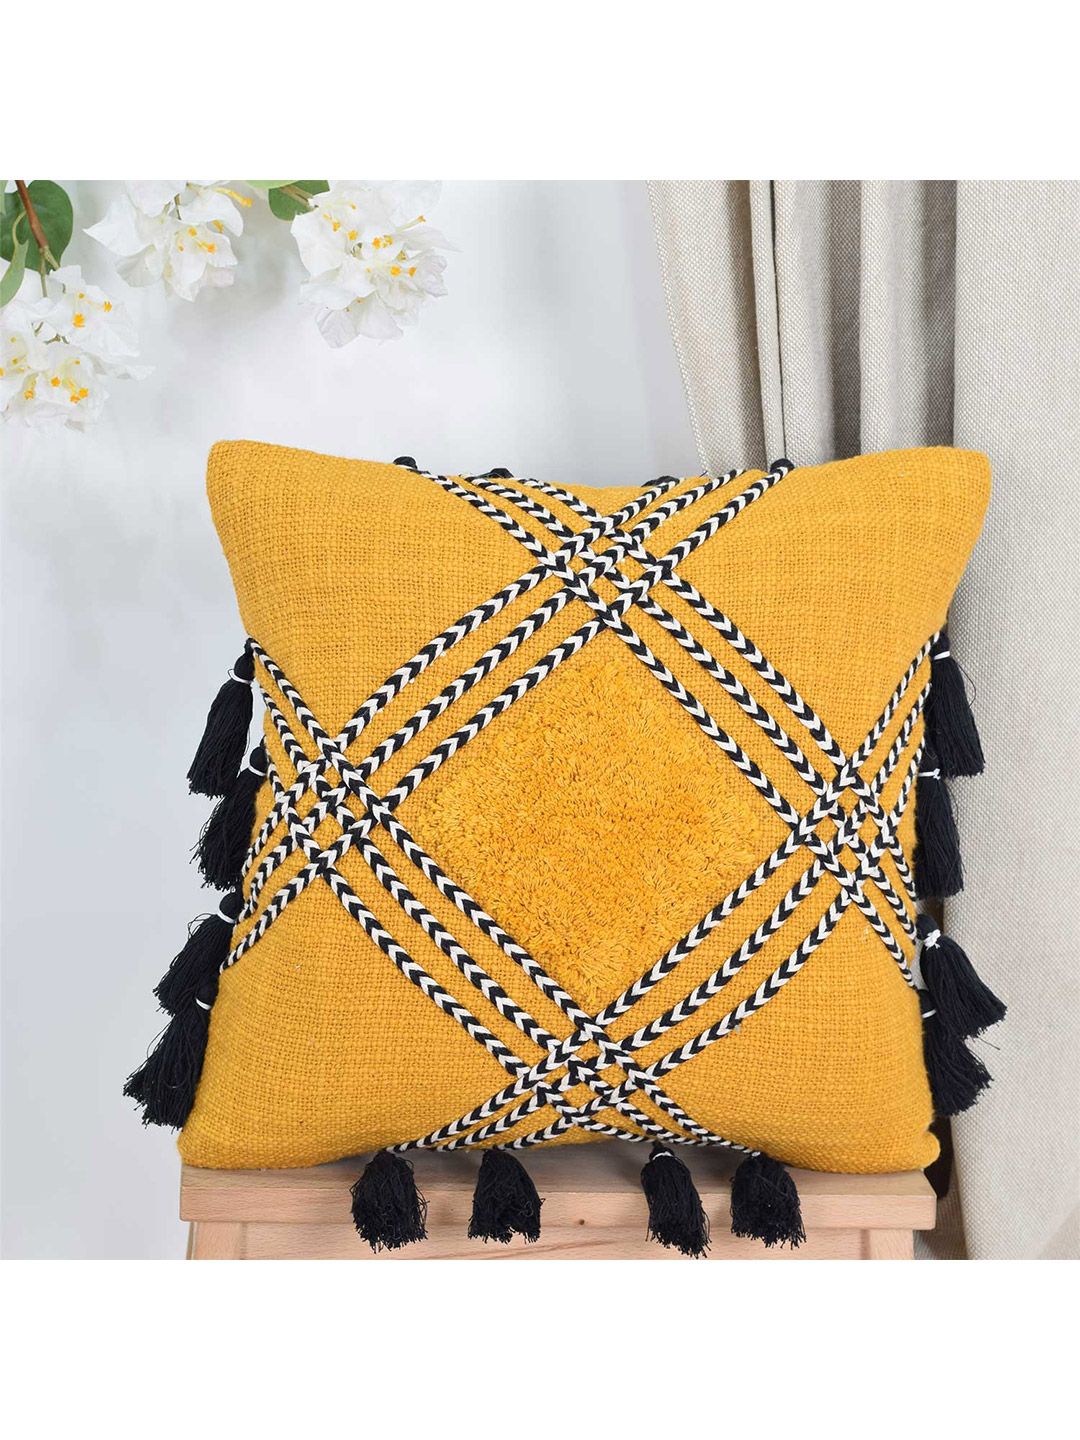 BLANC9 Yellow & Black Embroidered Square Cushion Covers Price in India